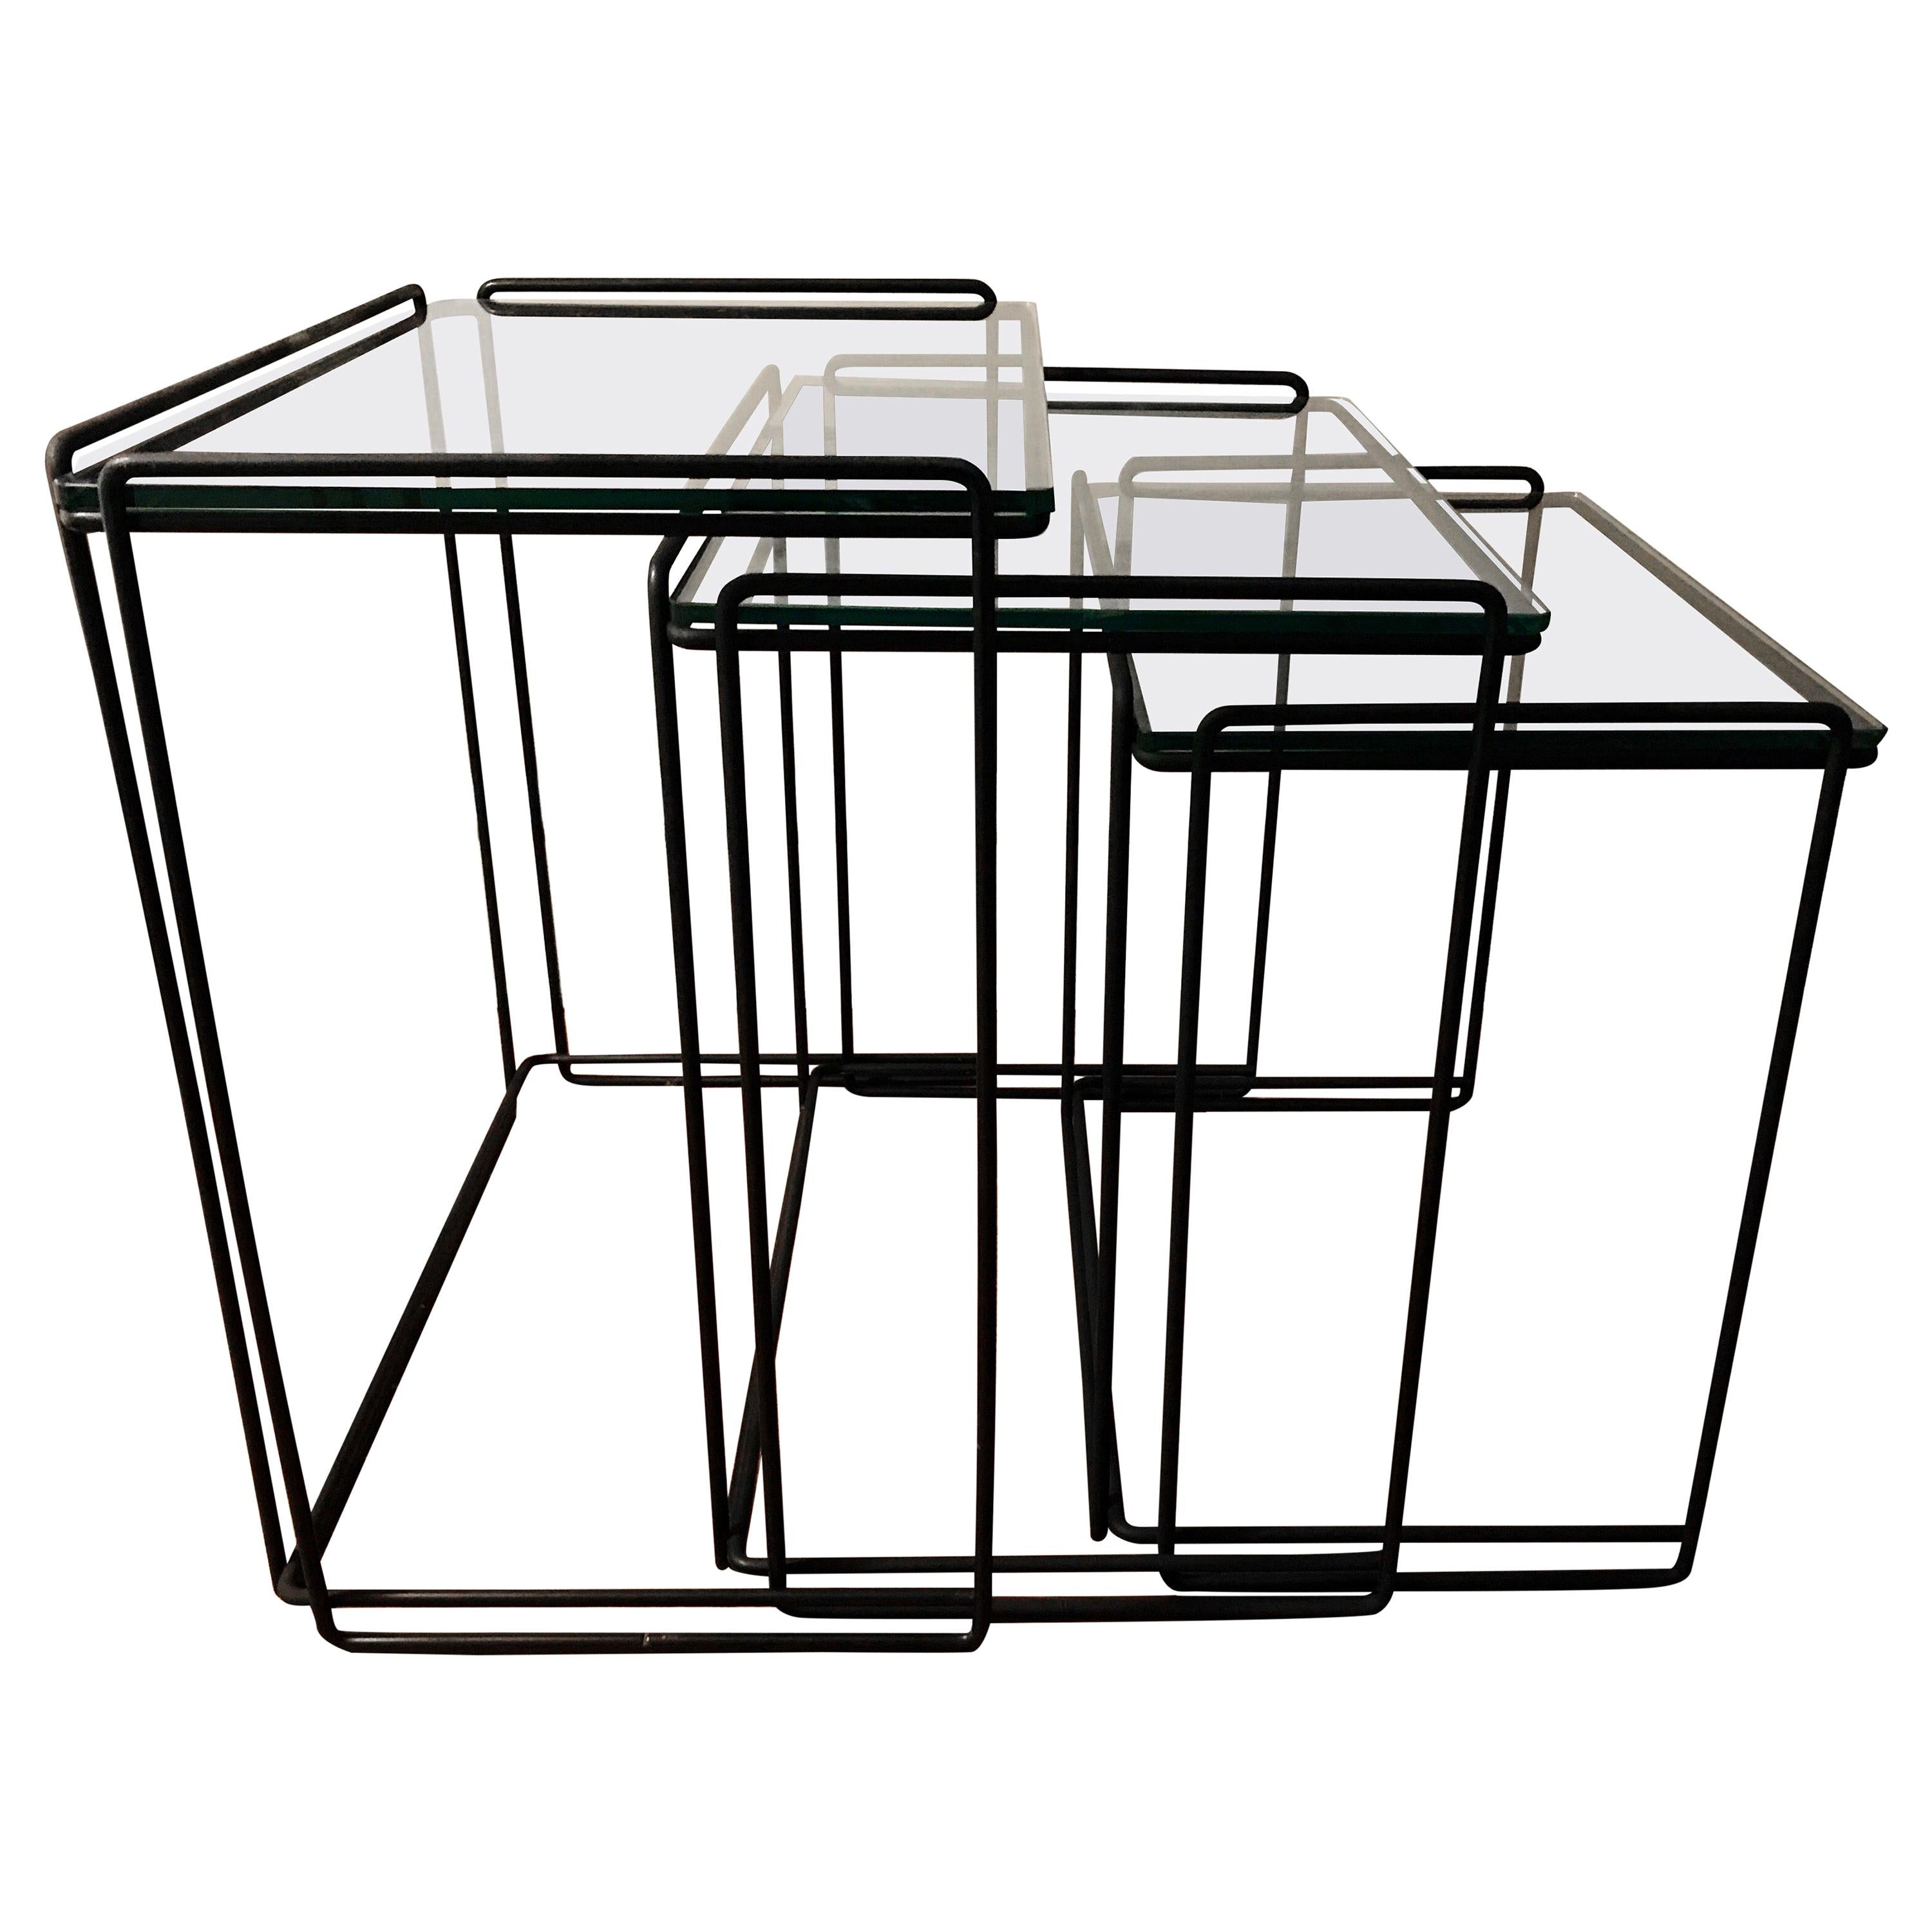 Postmodern “Isocele” Sculptural Iron Nesting Tables by Max Sauze for Attrow